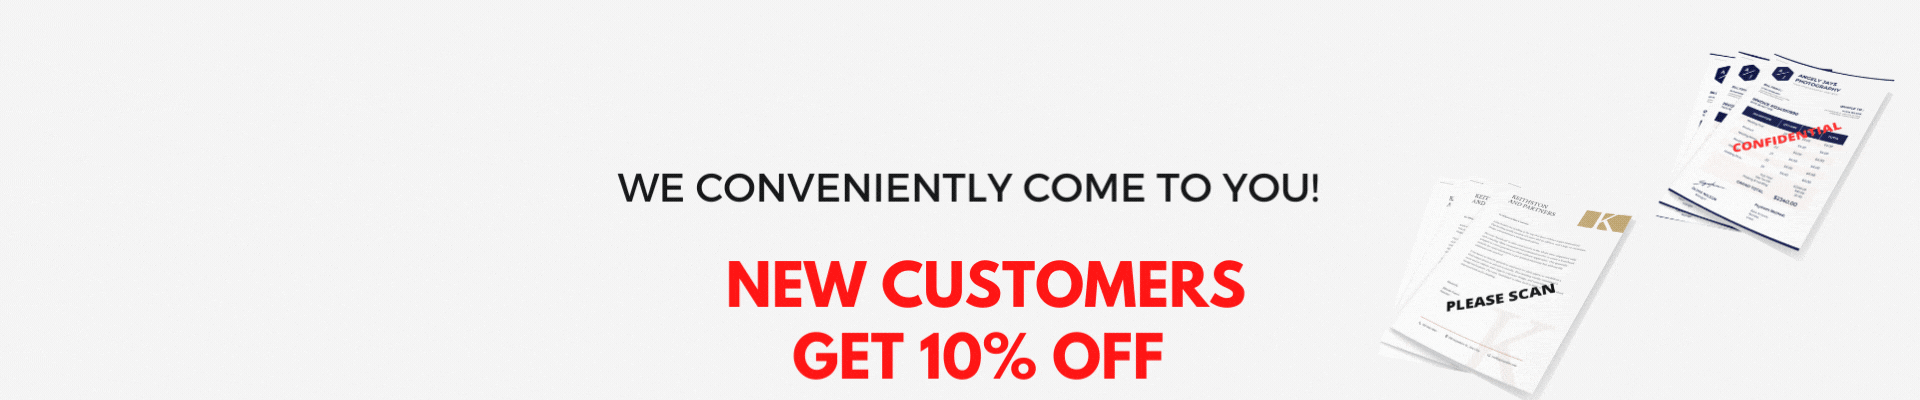 new customers get 10% off